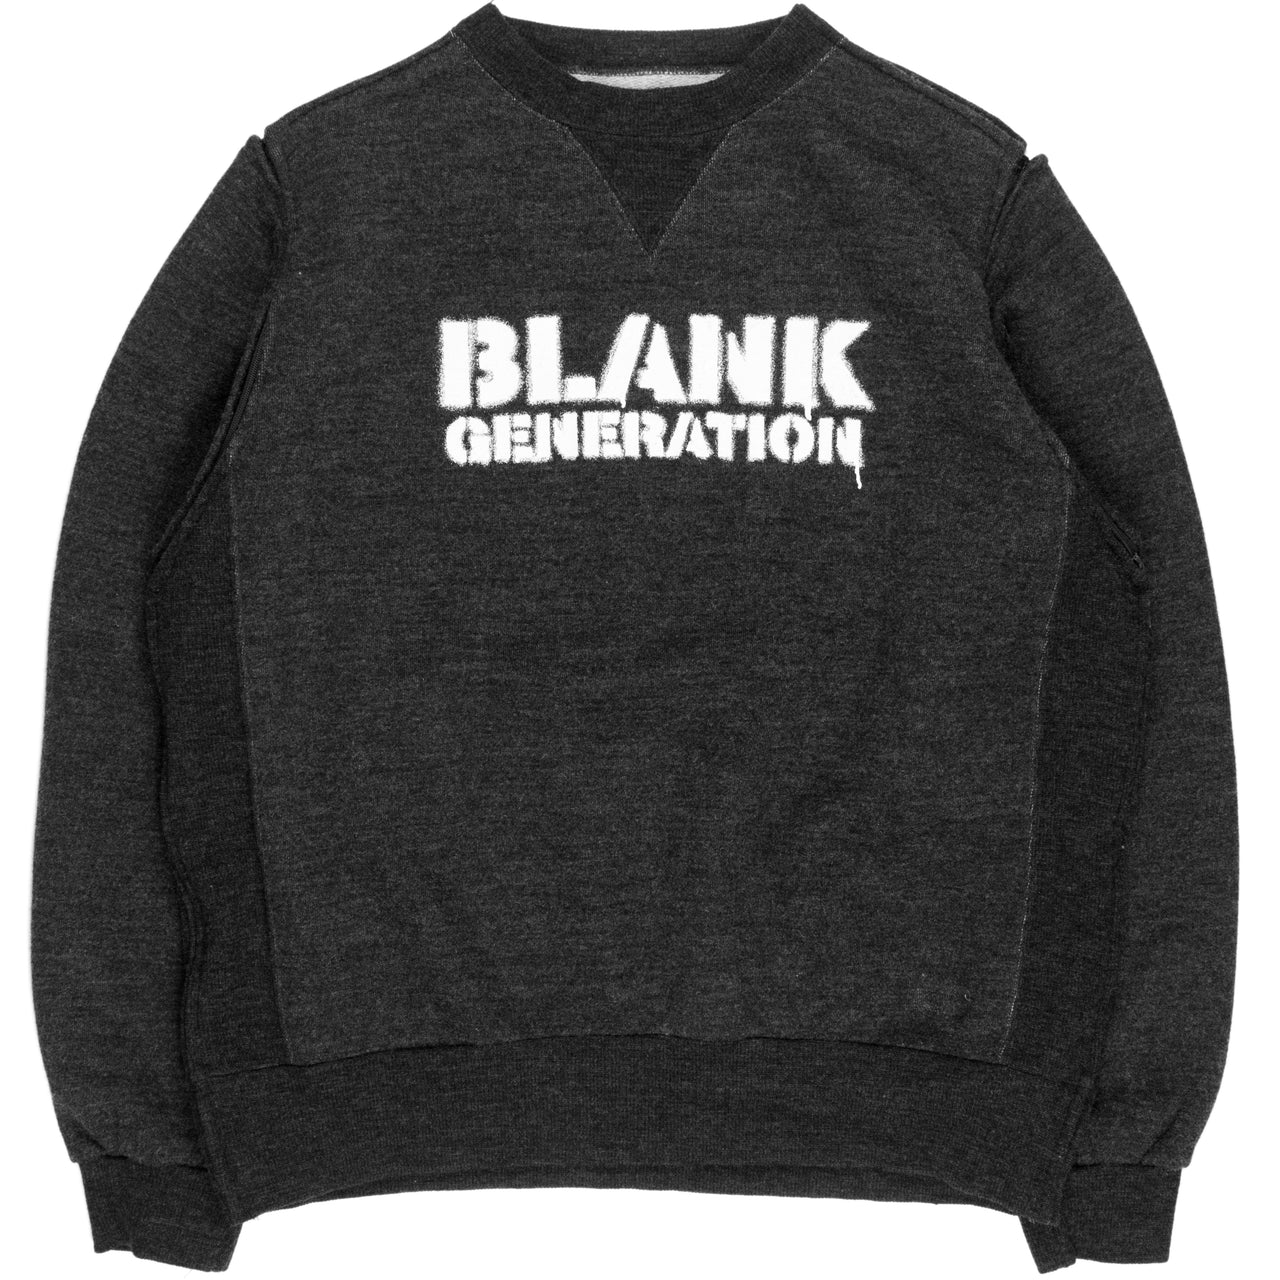 Undercover Blank Generation Sweater - AW99 “Ambivalence”